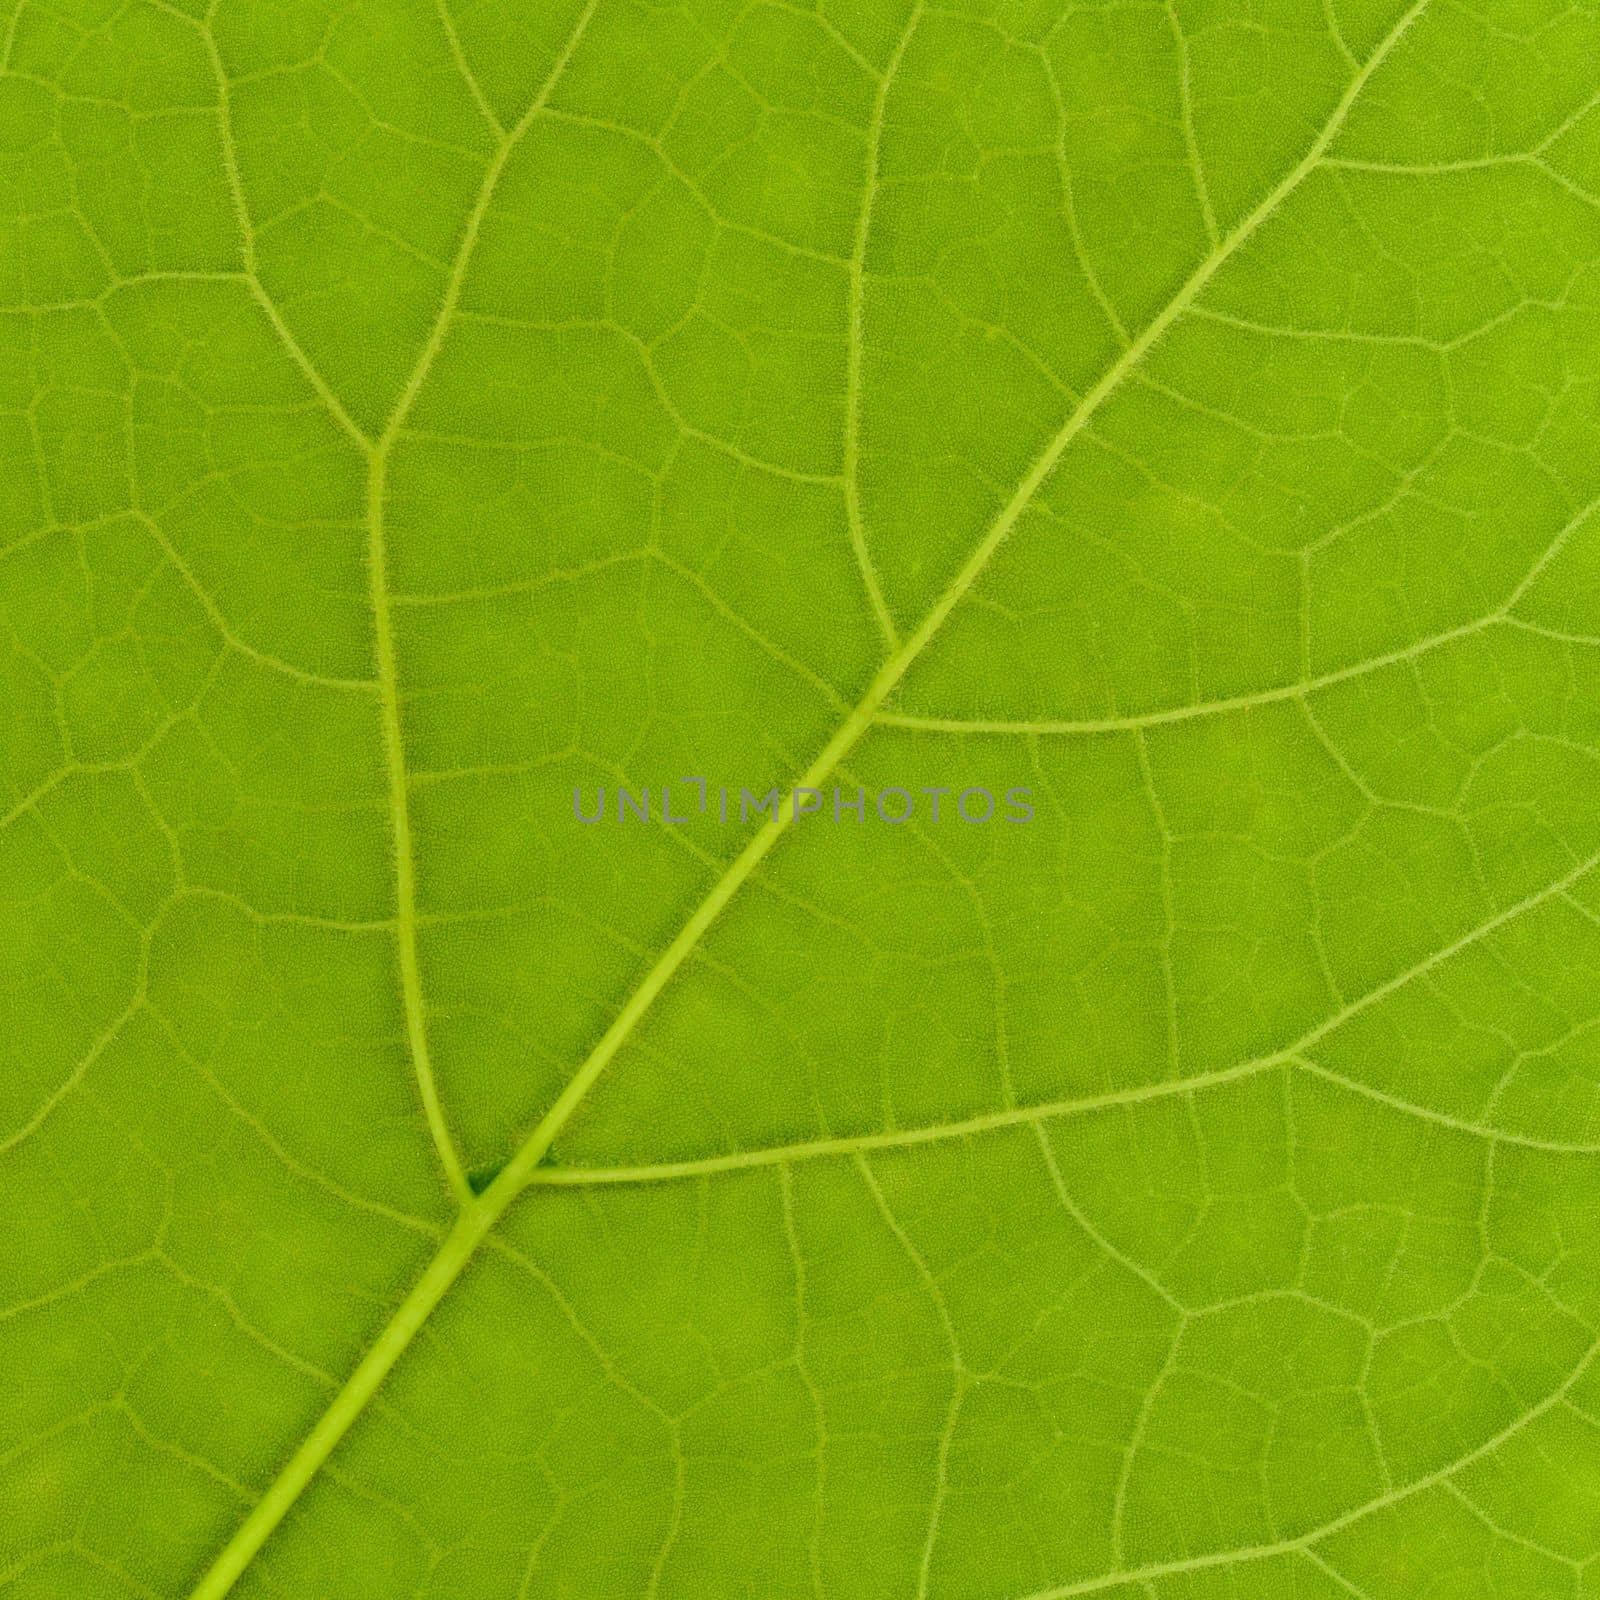 Green leaf texture by claudiodivizia